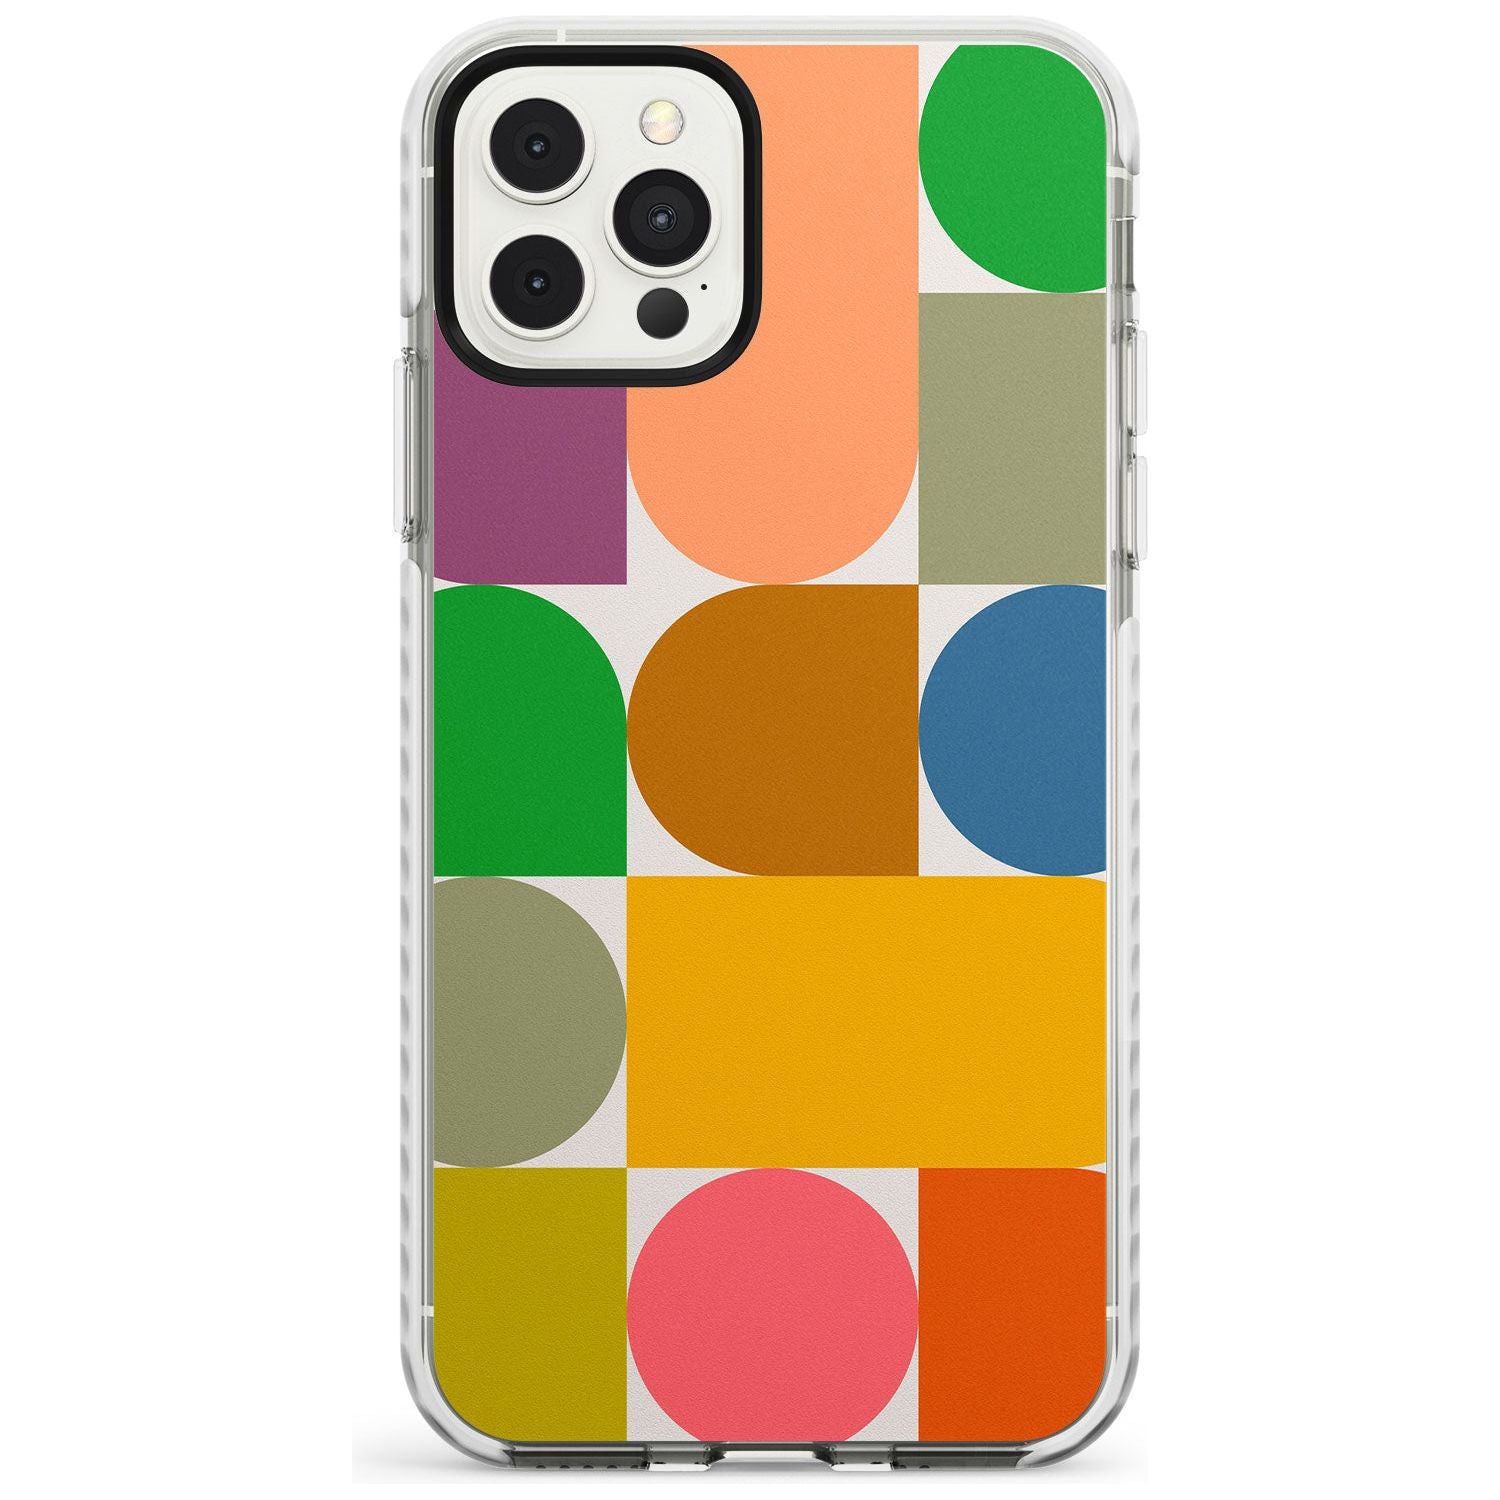 Abstract Retro Shapes: Rainbow Mix Slim TPU Phone Case for iPhone 11 Pro Max